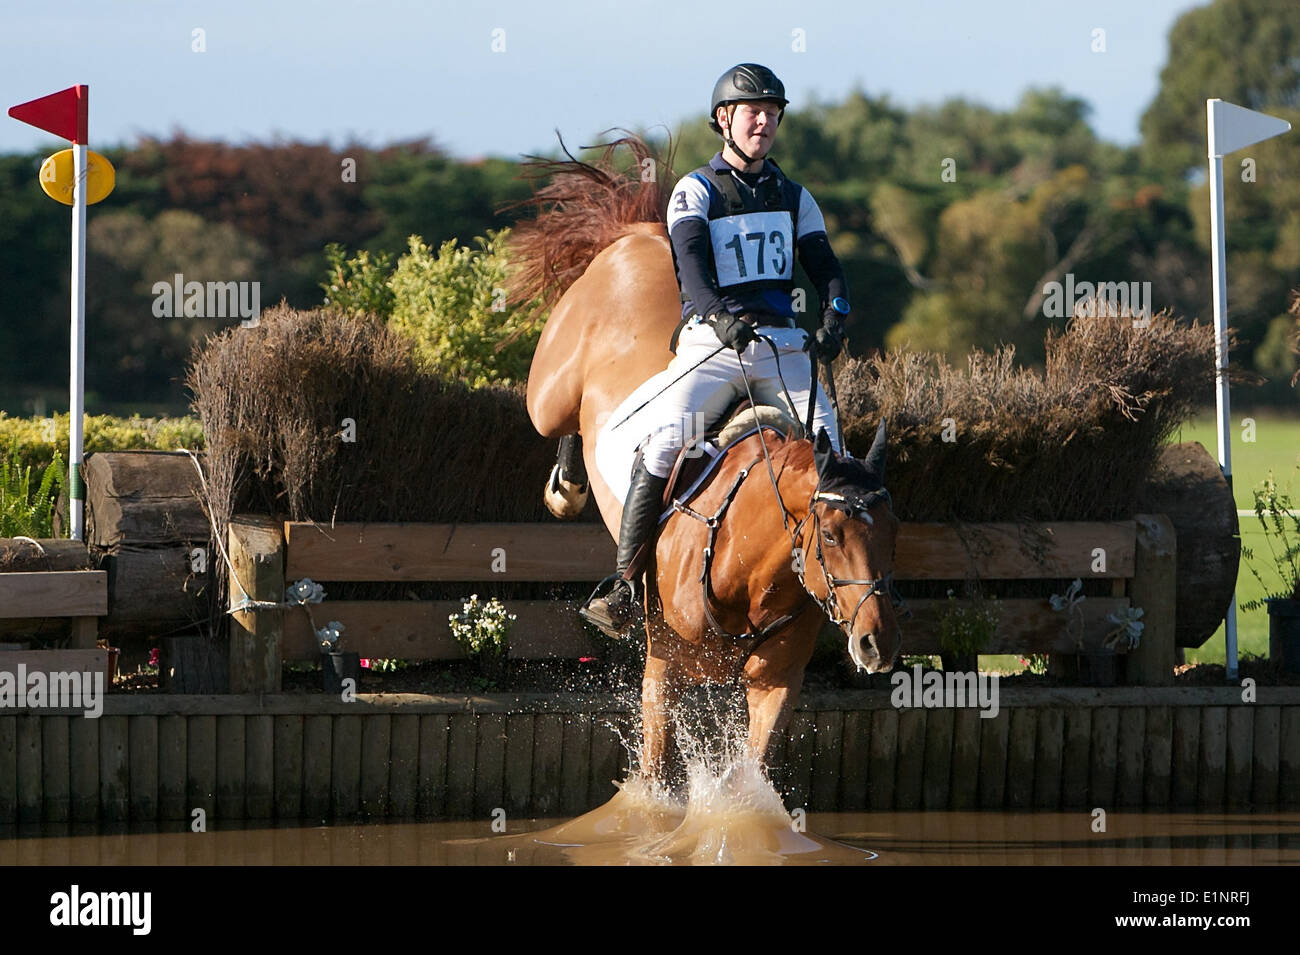 Melbourne, Victoria, Australia. 8th June, 2014. June. 8. 2014 - Melbourne, Victoria, Australia - ANDREW COOPER of Victoria riding EGO REGENCY during day three of the Cross Country at the 2014 Melbourne International Horse Trial. Credit:  Tom Griffiths/ZUMA Wire/ZUMAPRESS.com/Alamy Live News Stock Photo